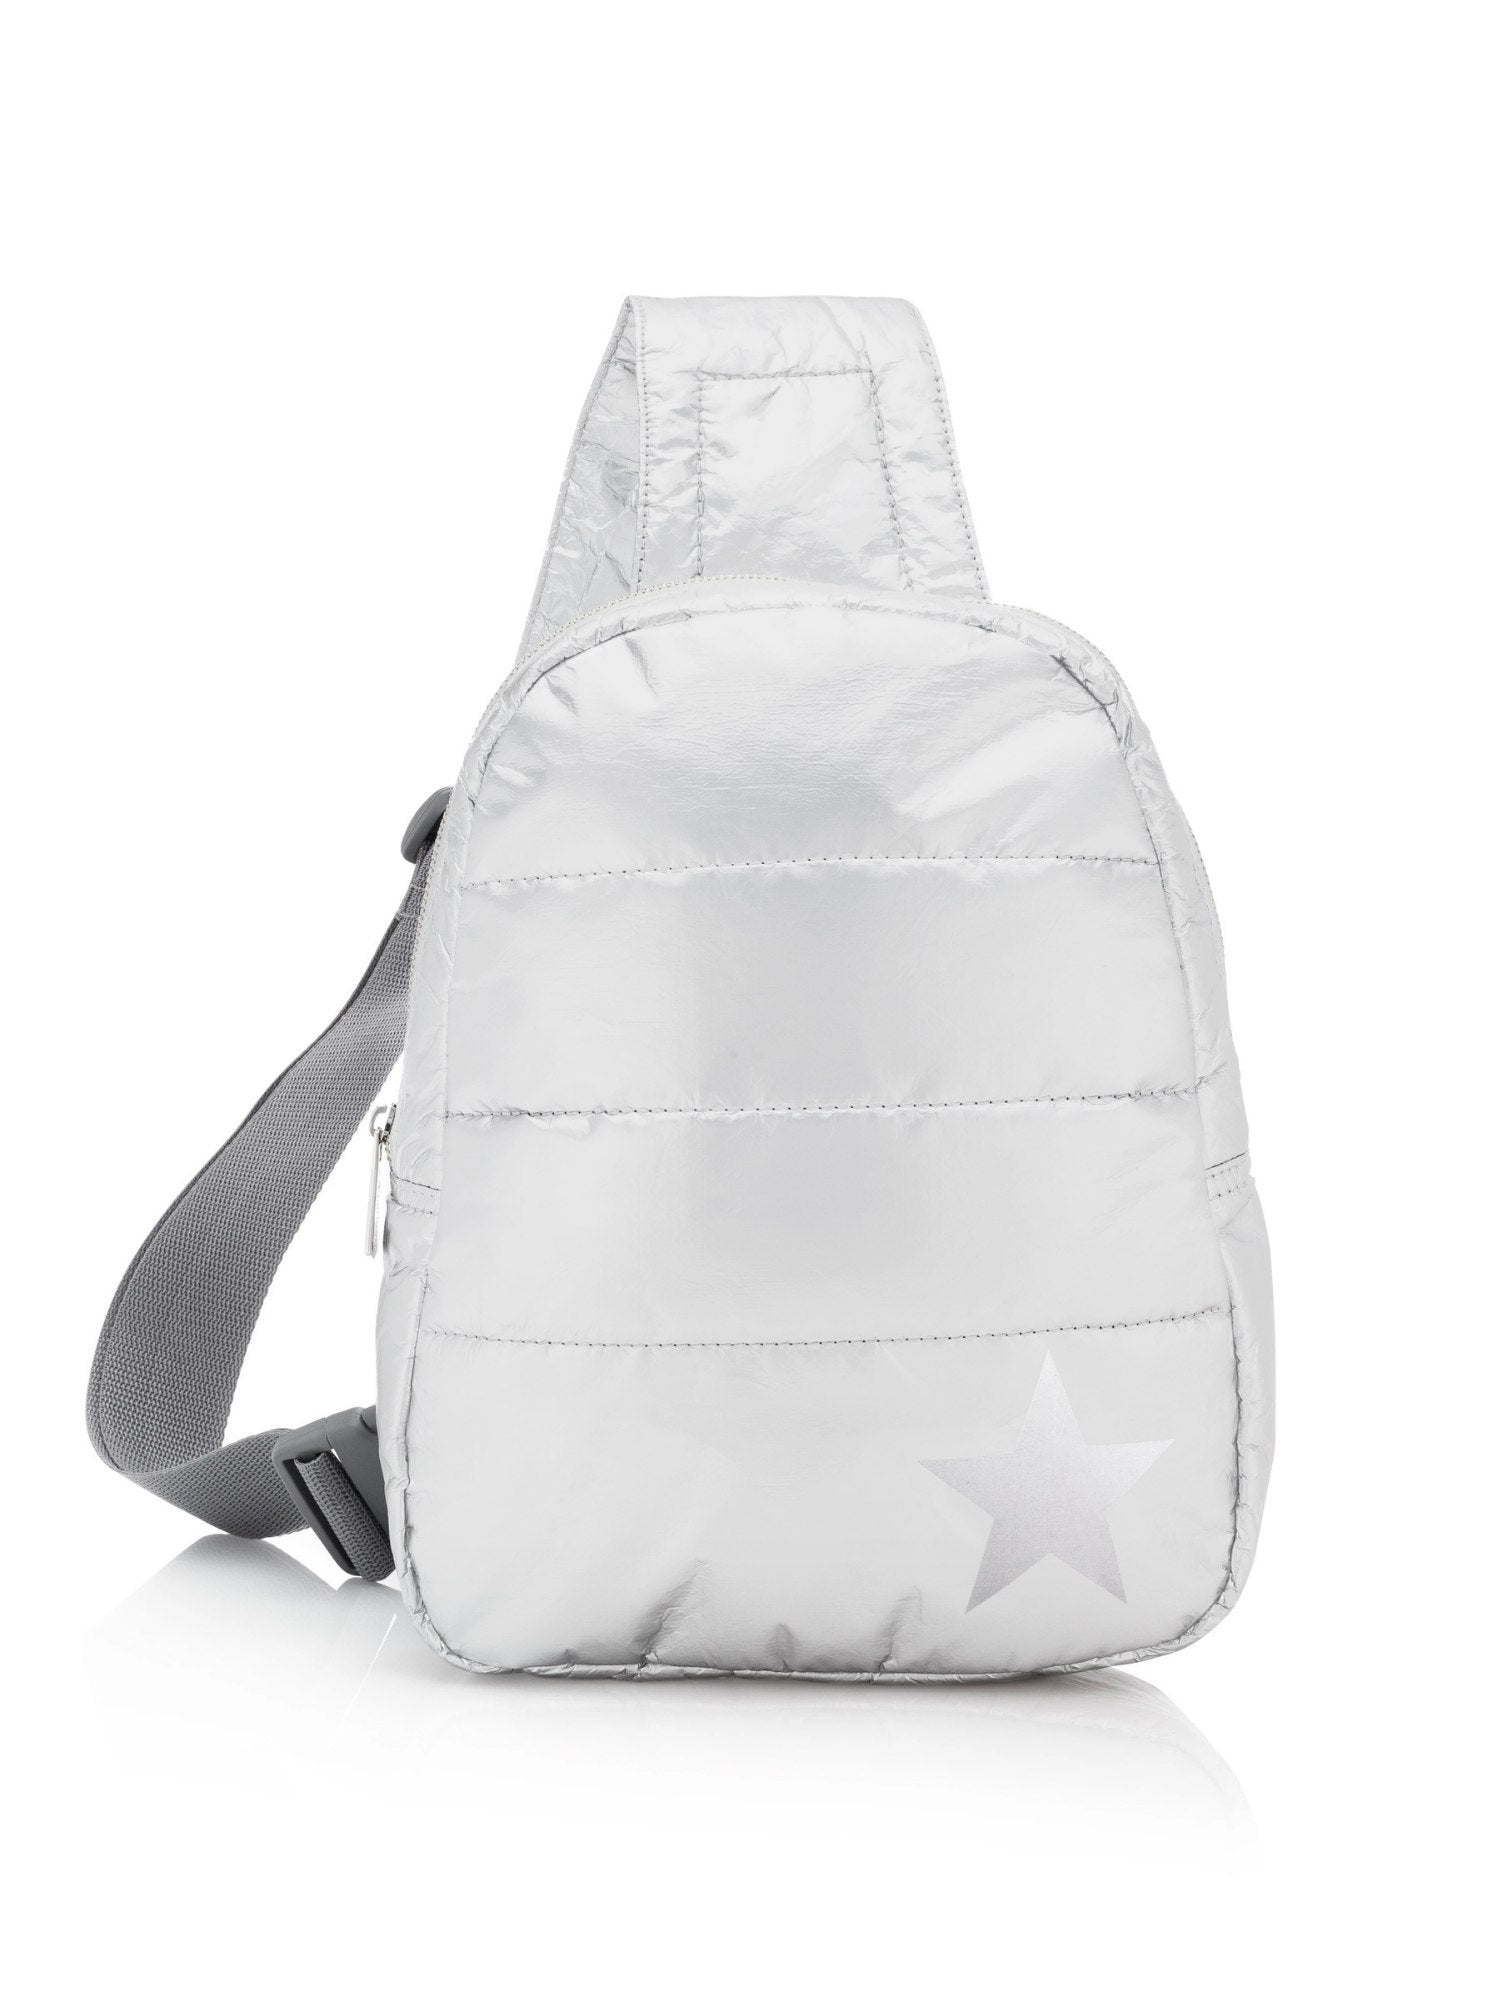 Puffer Crossbody Backpack in Shimmer White with Silver Star